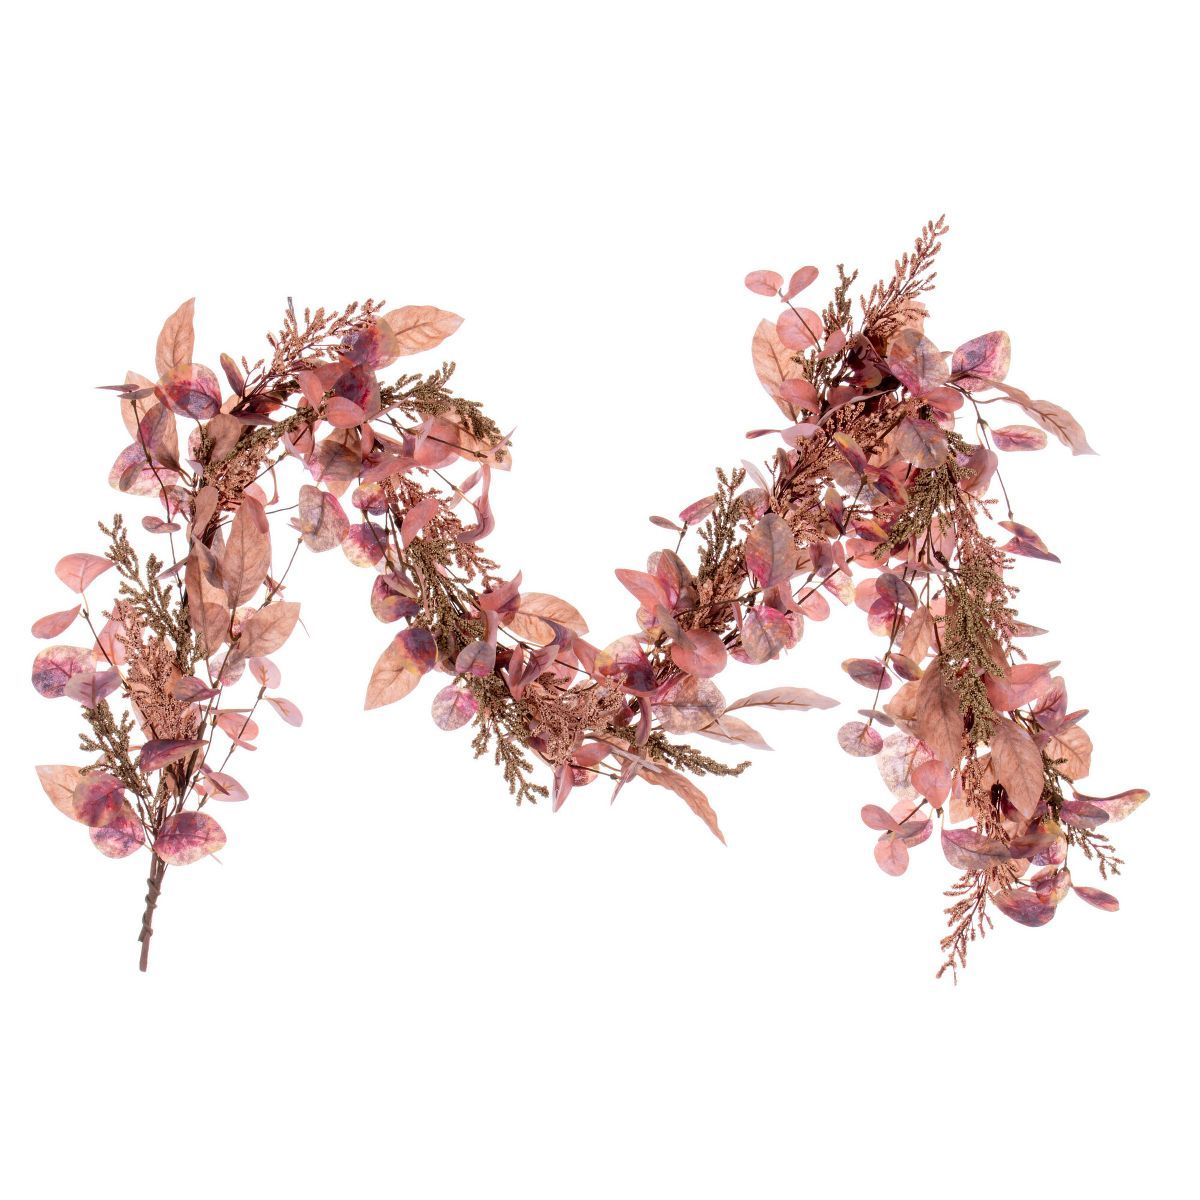 Vickerman 5' Dusty Rose Artificial Fall Eucalyptus and Berry Garland. | Target